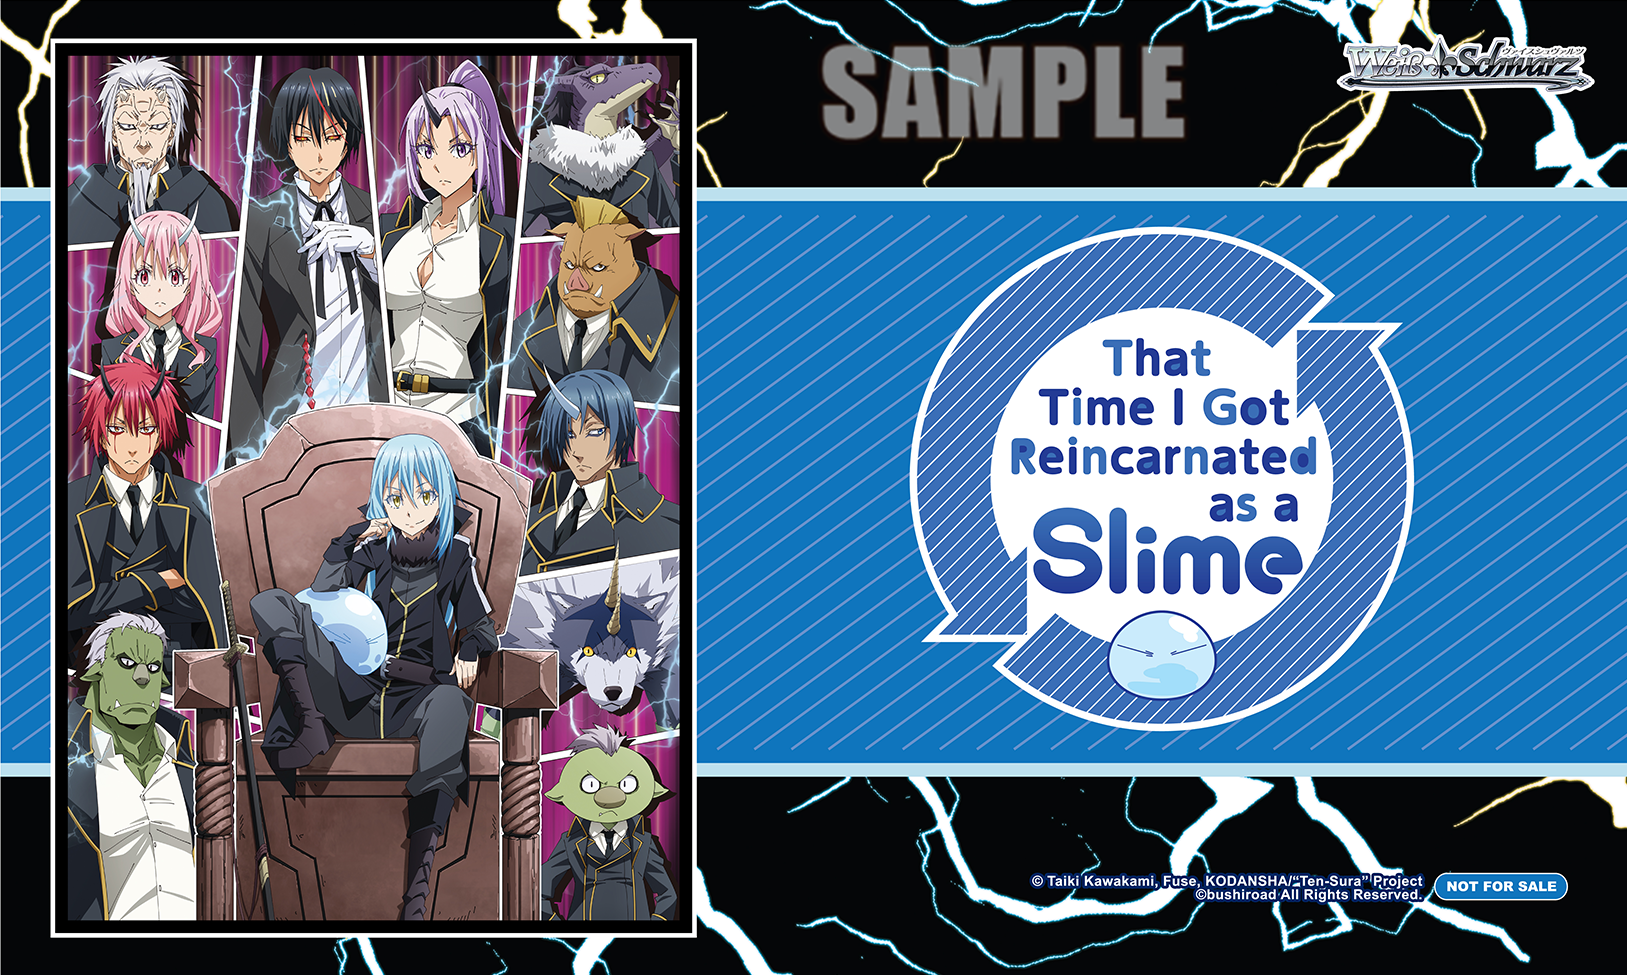 List of Japanese That Time I Got Reincarnated as a Slime Vol.3 [Weiss  Schwarz] Singles